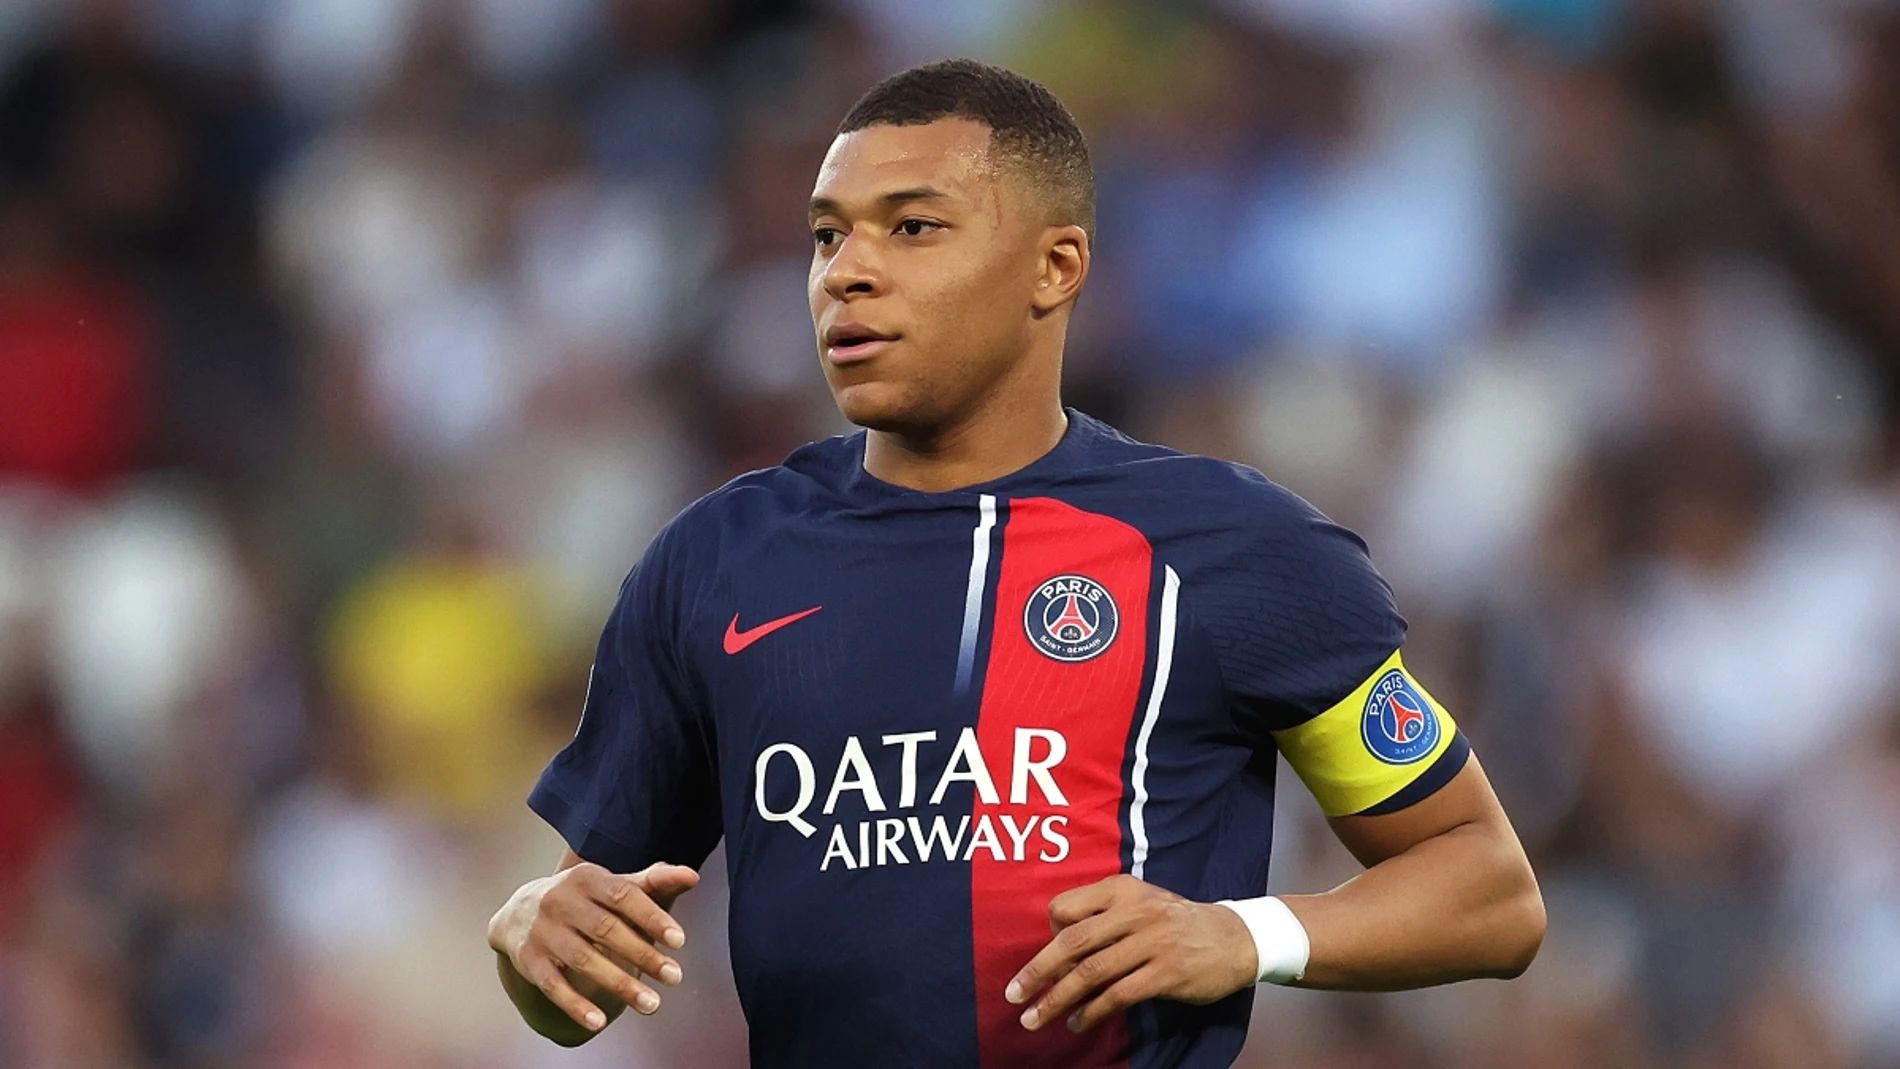 Real Madrid “totally confident” of signing Kylian Mbappe following PSG departure decision